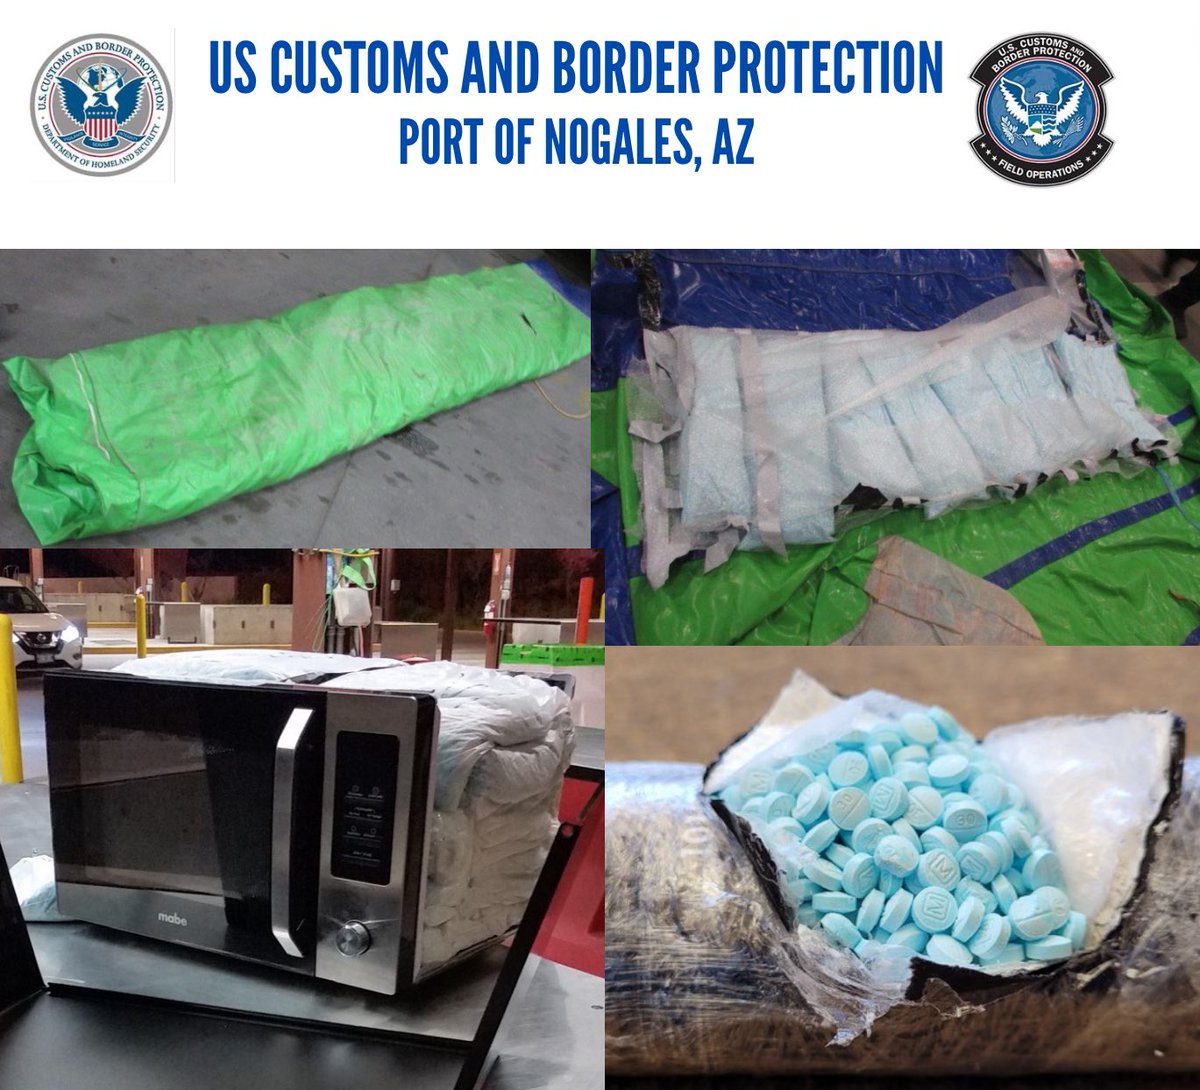 More than 1.1 million fentanyl pills seized at the Nogales POE in 4 days 3/26 About 166,270 pills hidden in a microwave oven 3/28 Approx 661,050 fentanyl pills and 3.9 lbs meth in a deflated bounce house 3/29 About 362,700 fentanyl pills hidden in doors and firewall of a vehicle